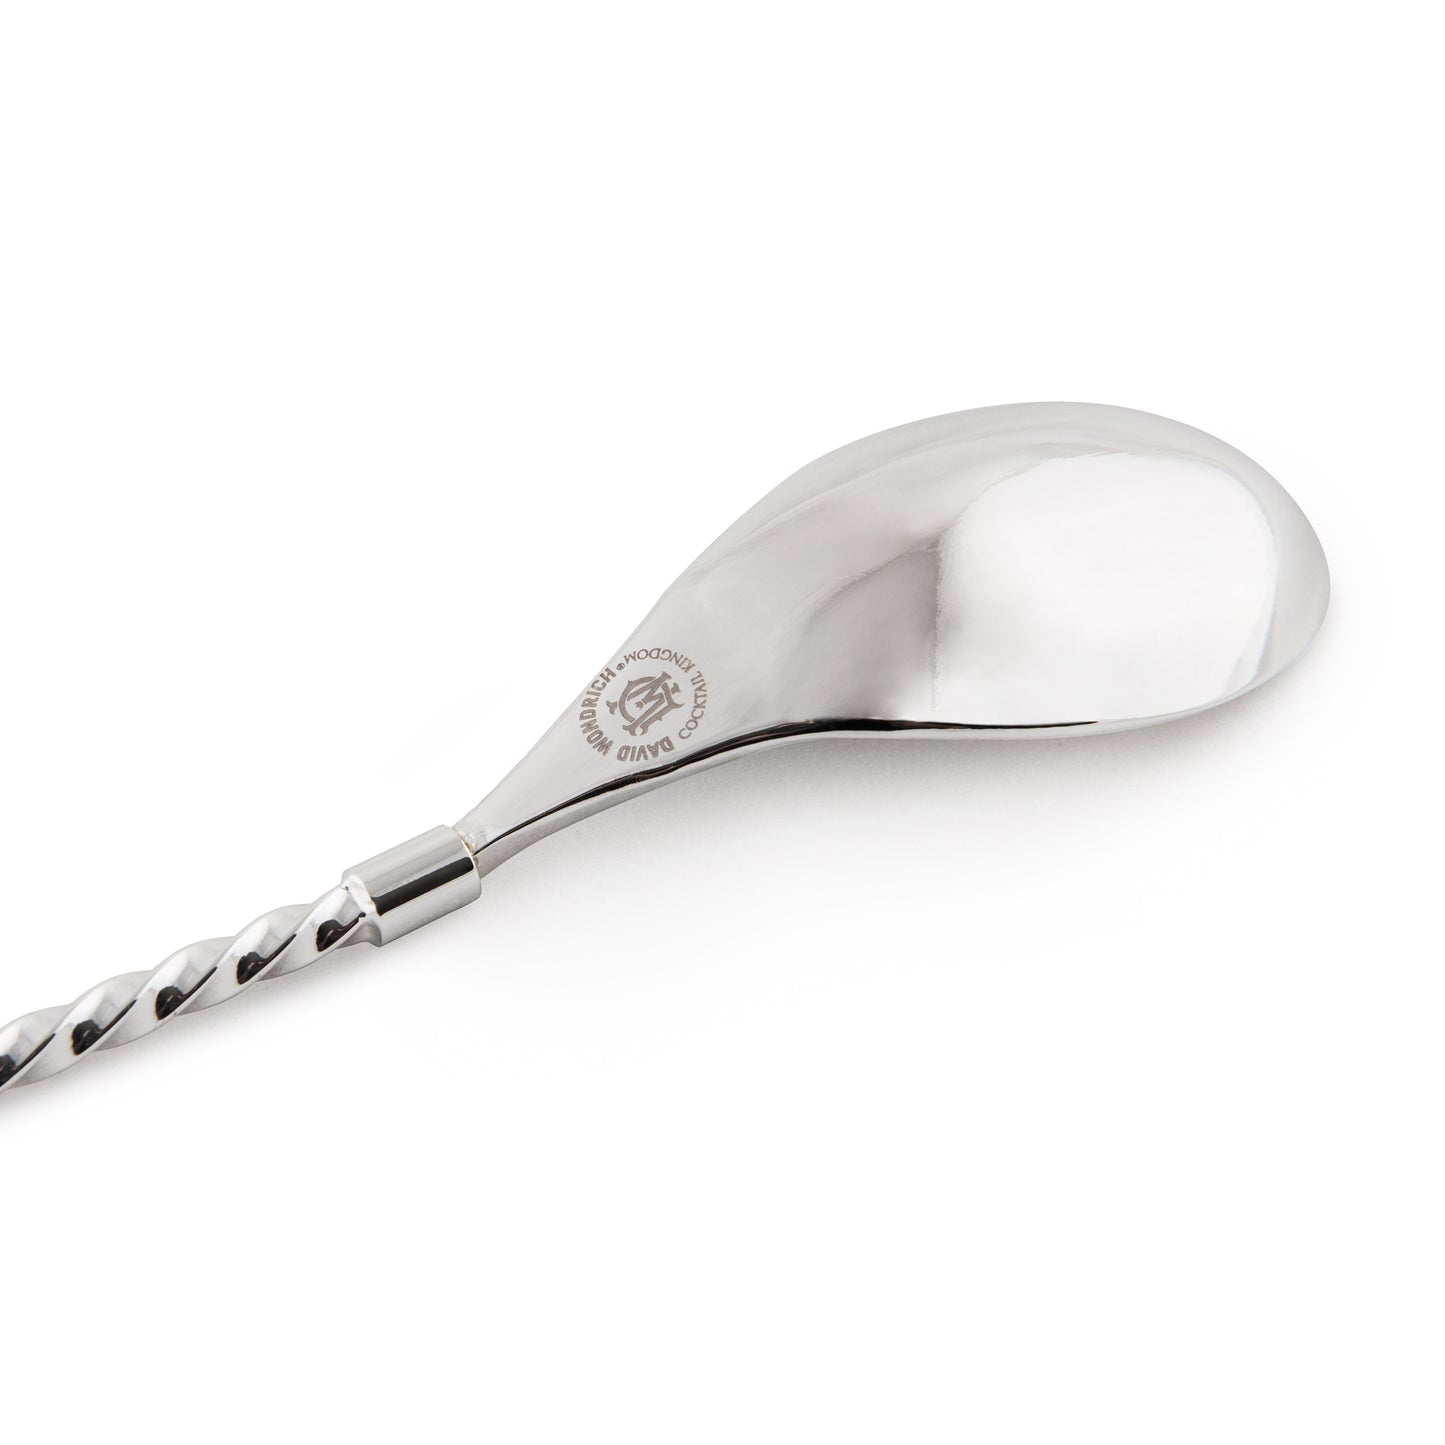 JIM GRAY™ BARSPOON / SILVER-PLATED EPNS / 33cm